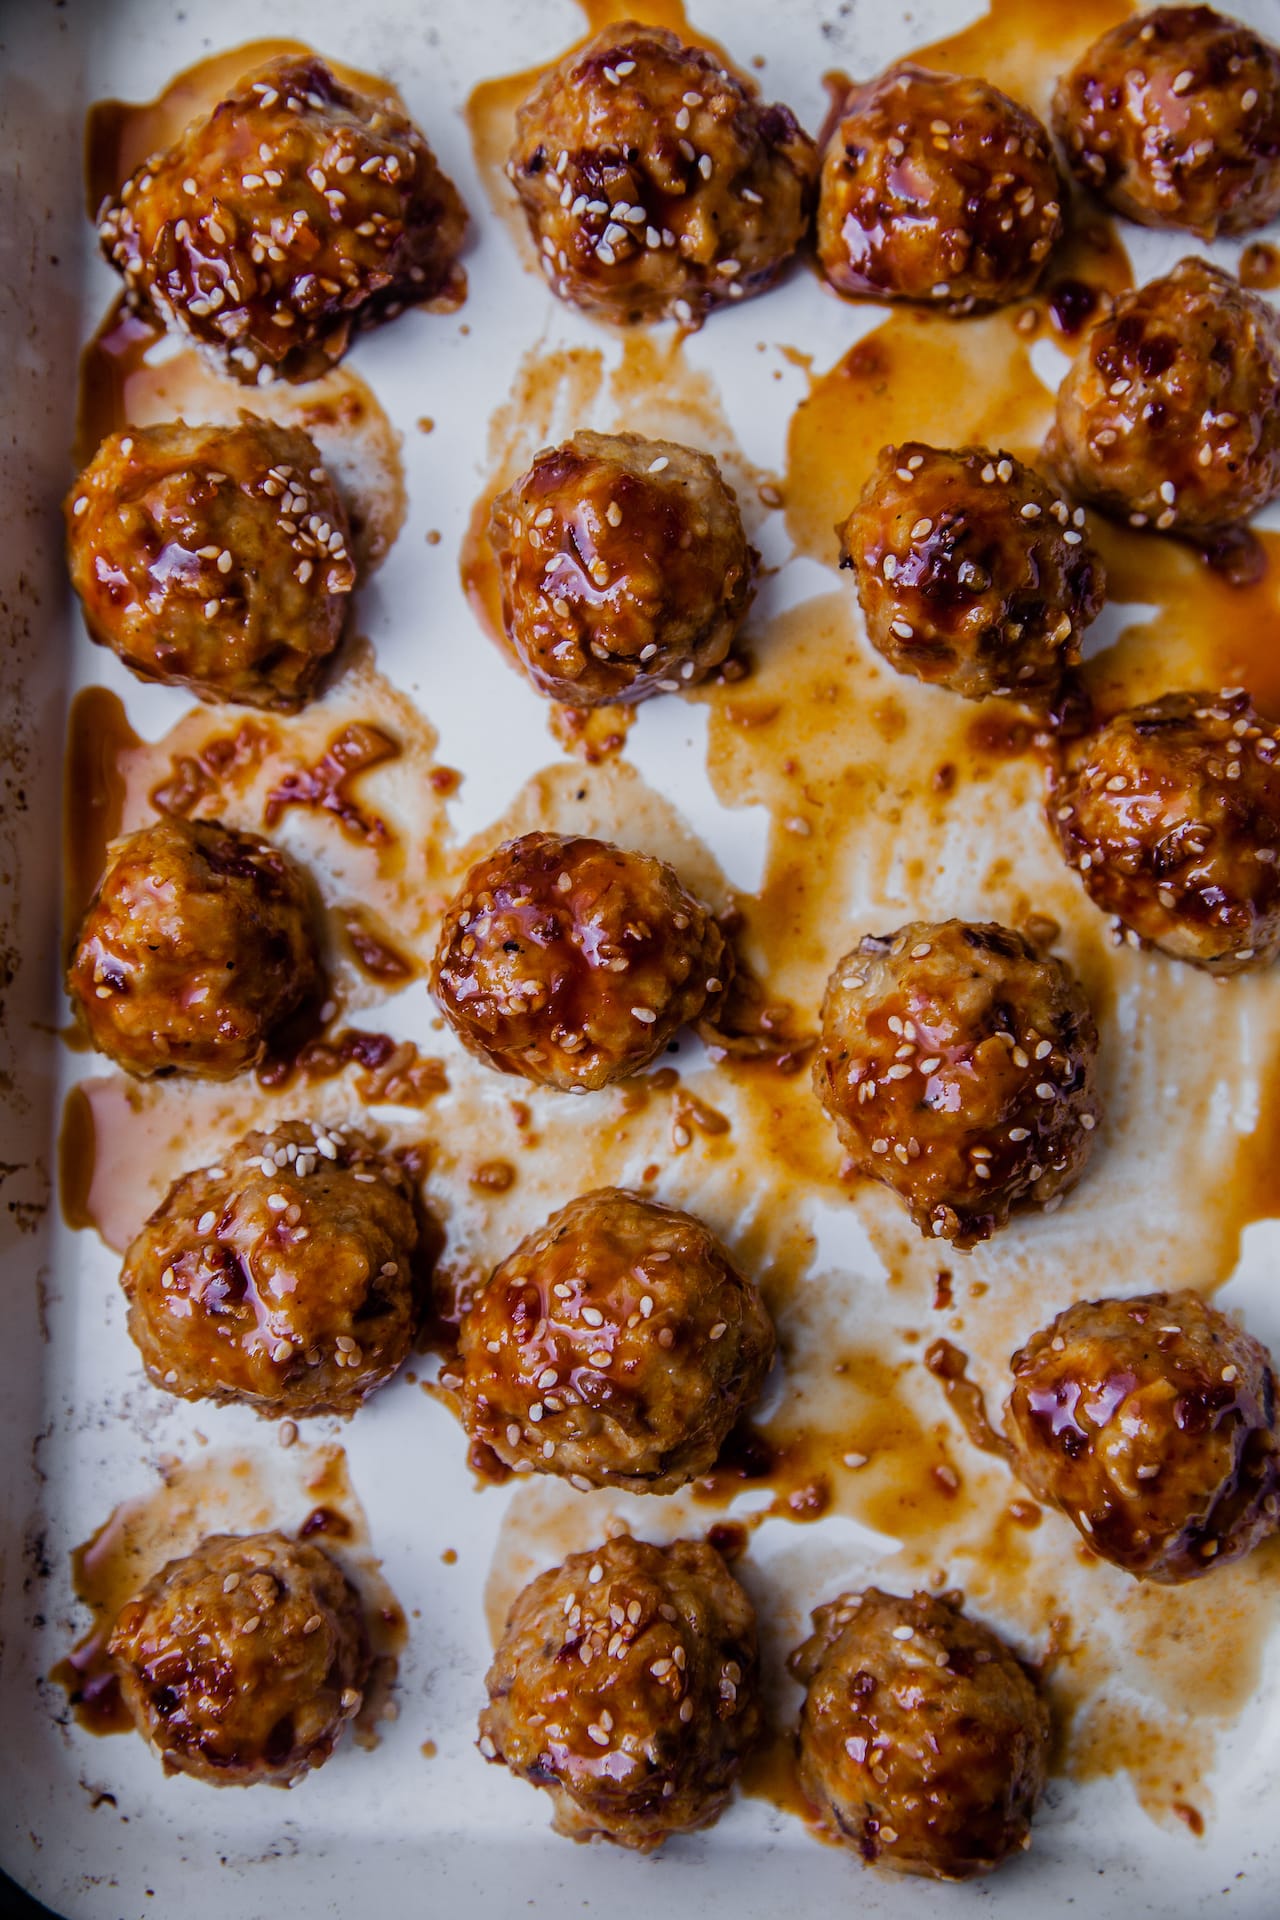 Spiced Sticky Baked Chicken Meatballs | Playful Cooking #meatballs #chicken #partybites #baked #appetizers #stickysauce